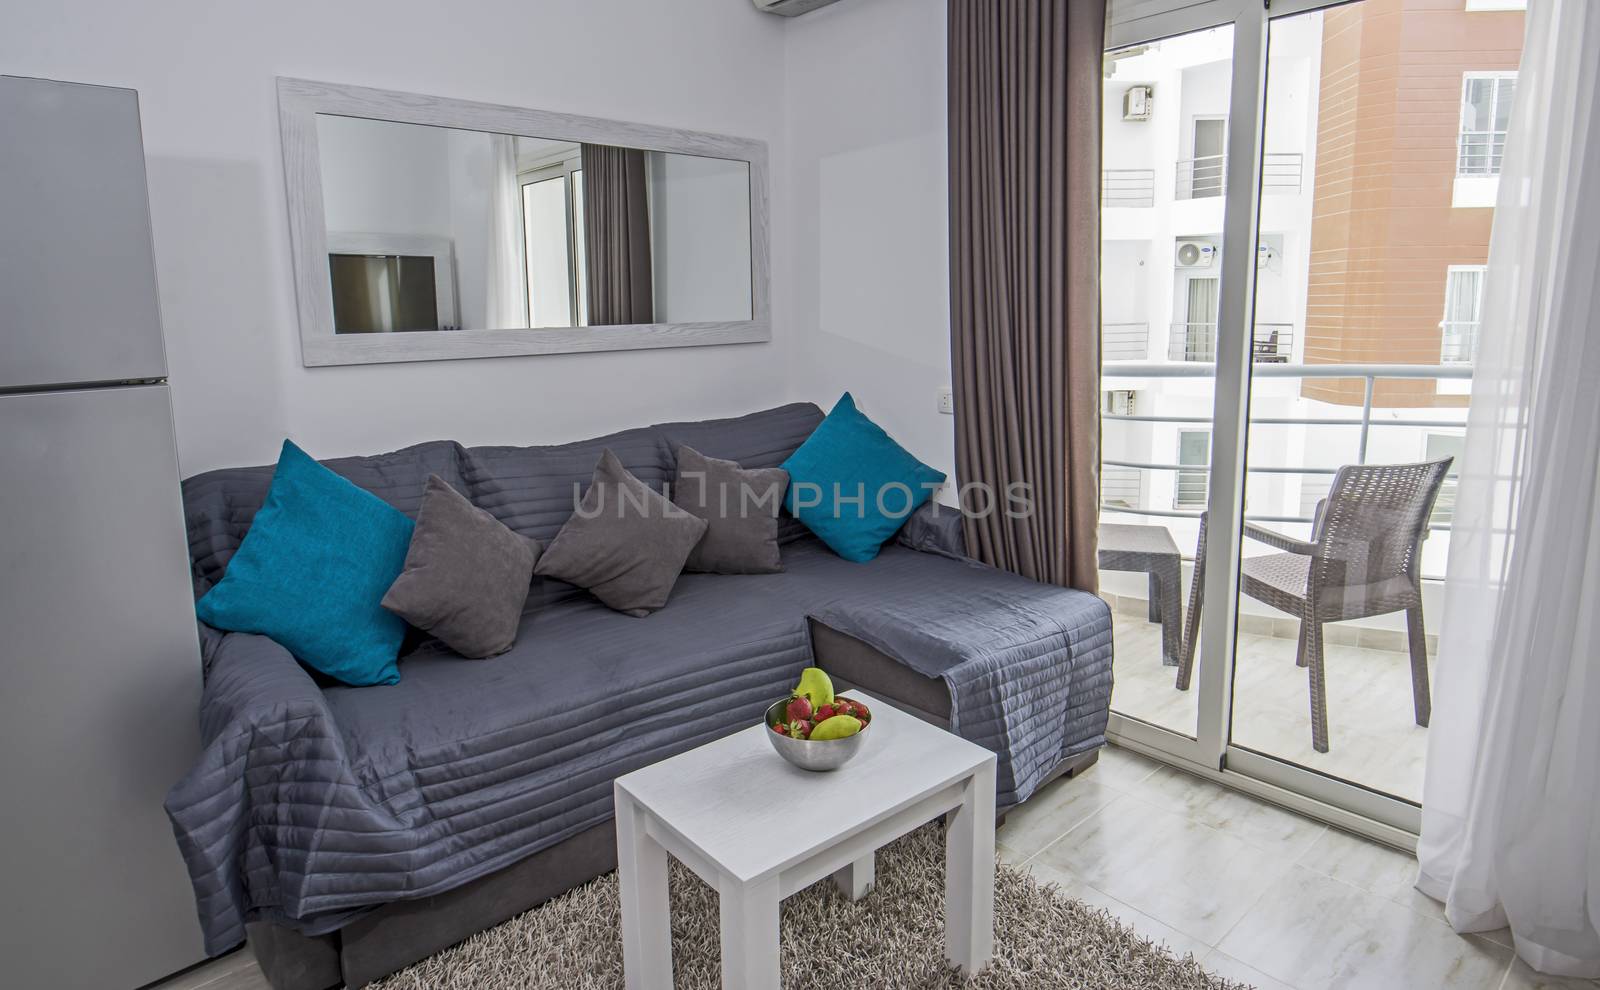 Living room lounge in luxury studio apartment show home with balcony showing interior design decor furnishing